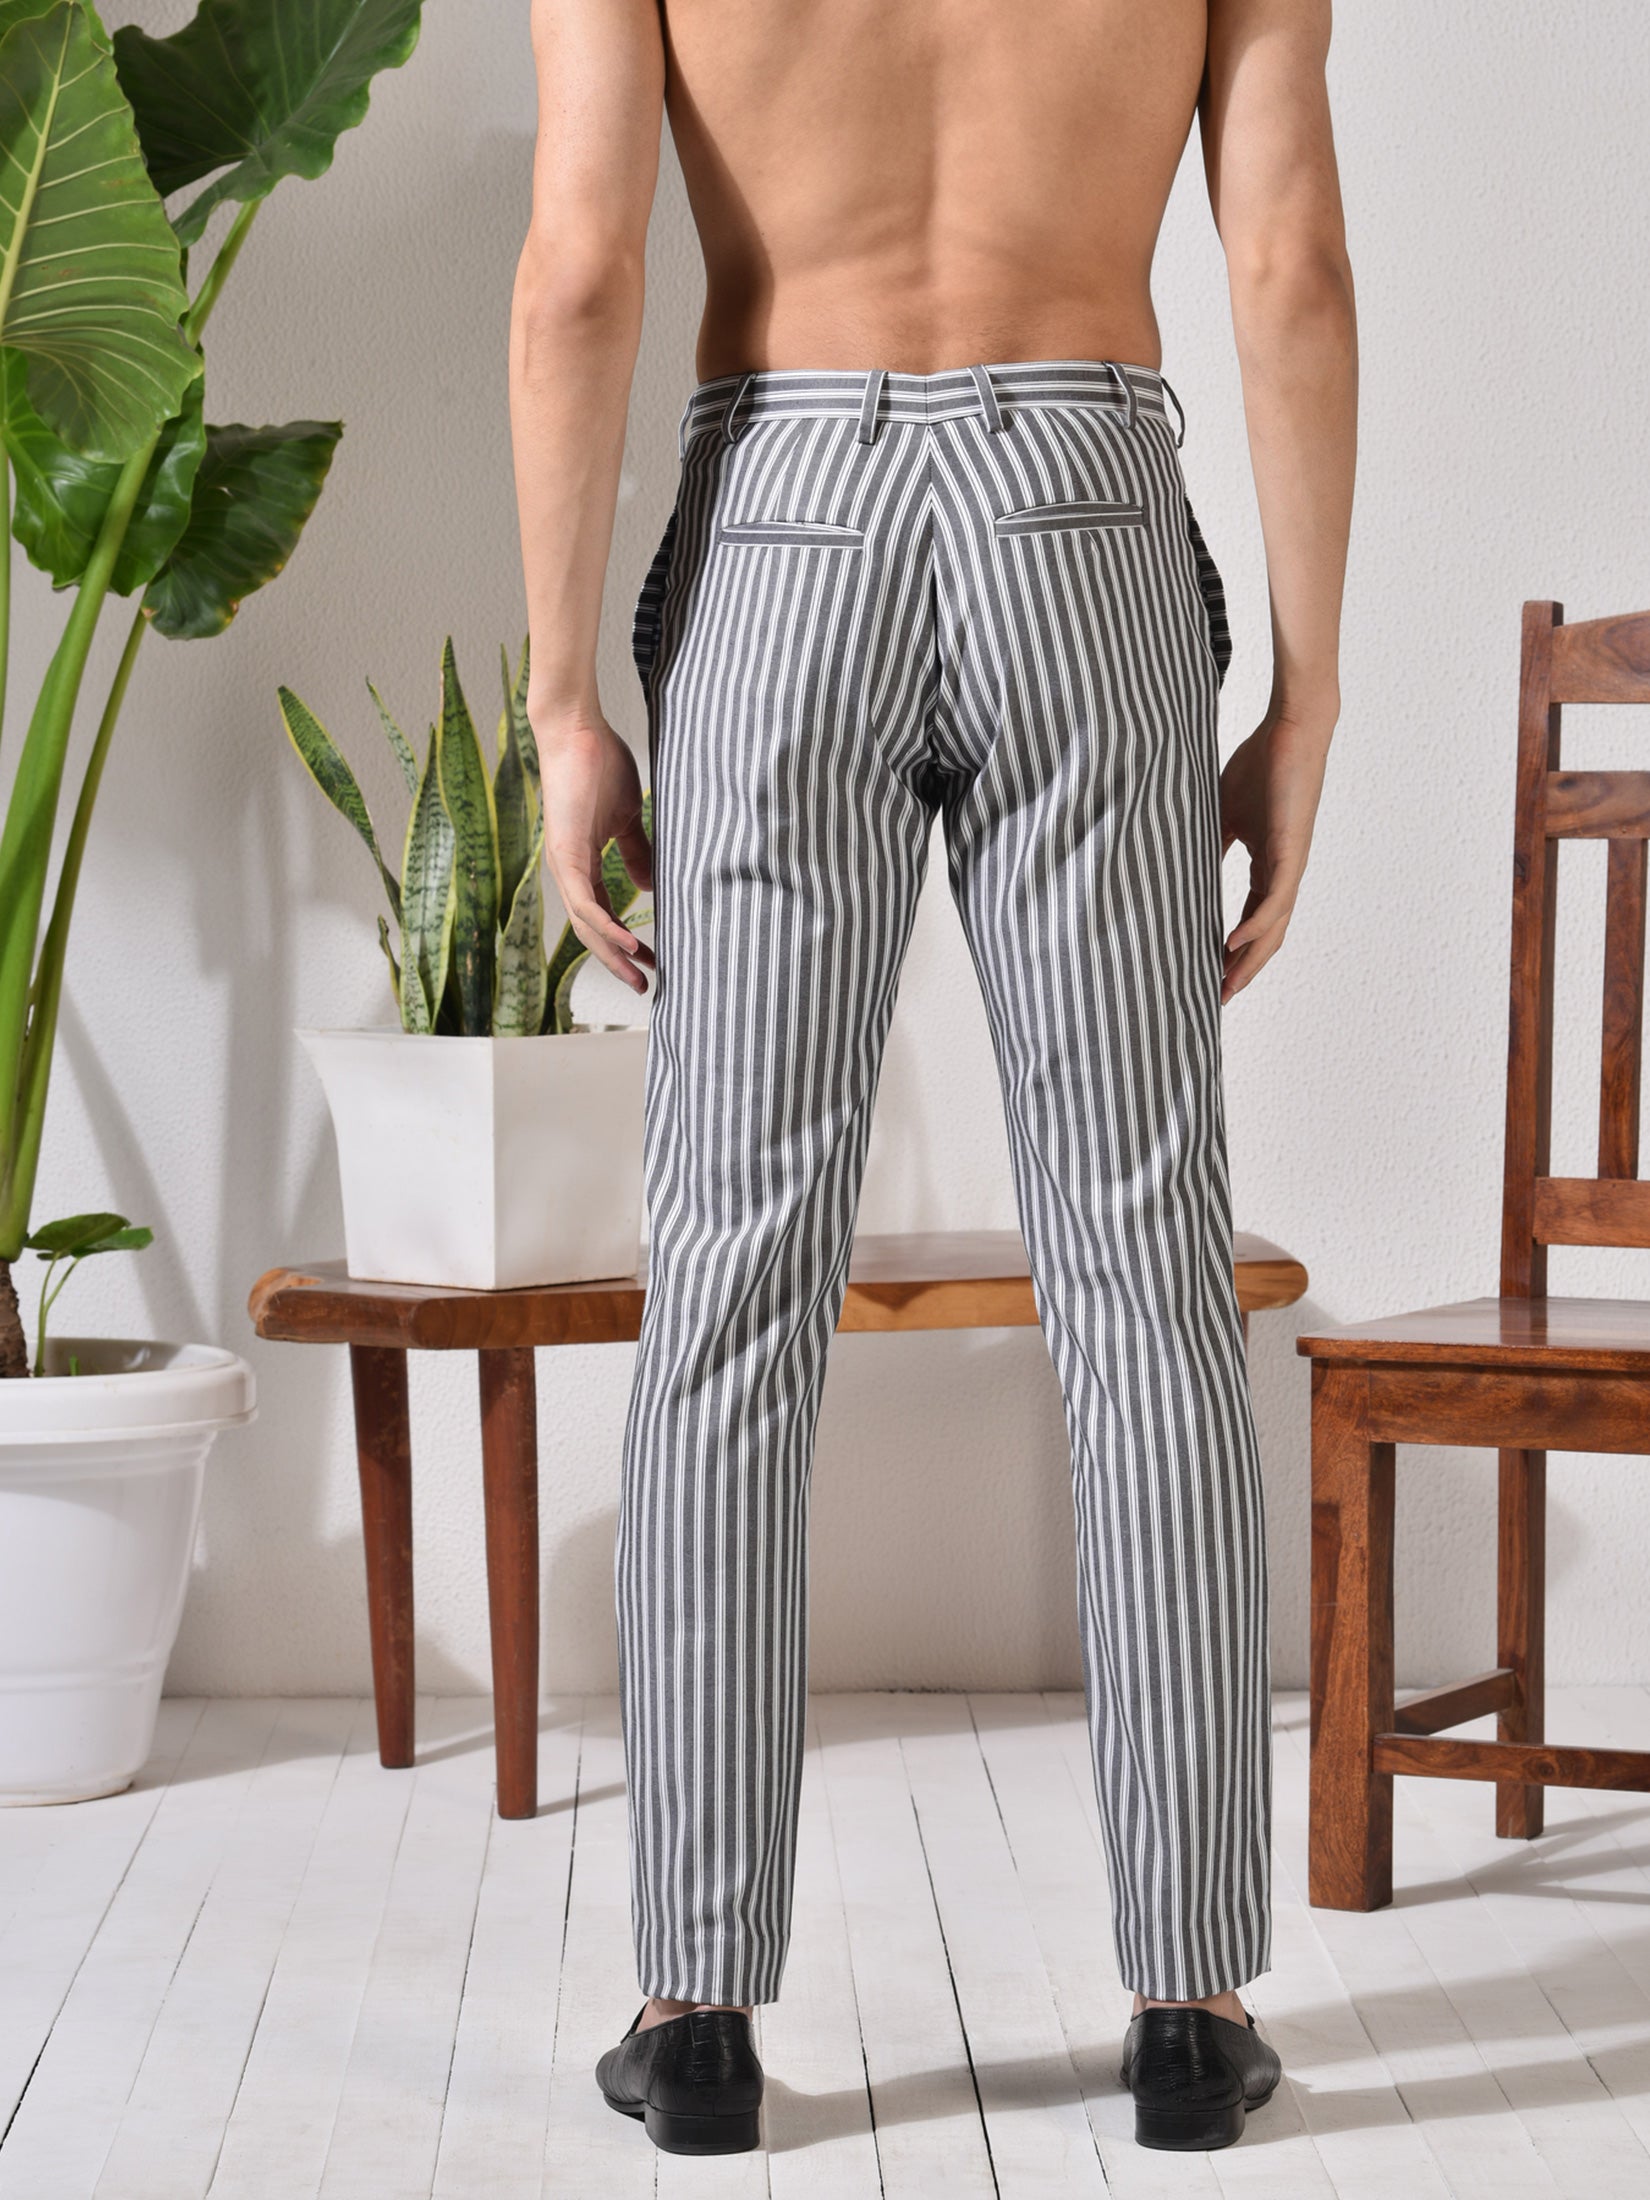 Crossing, Striped Trouser With Play of Lines